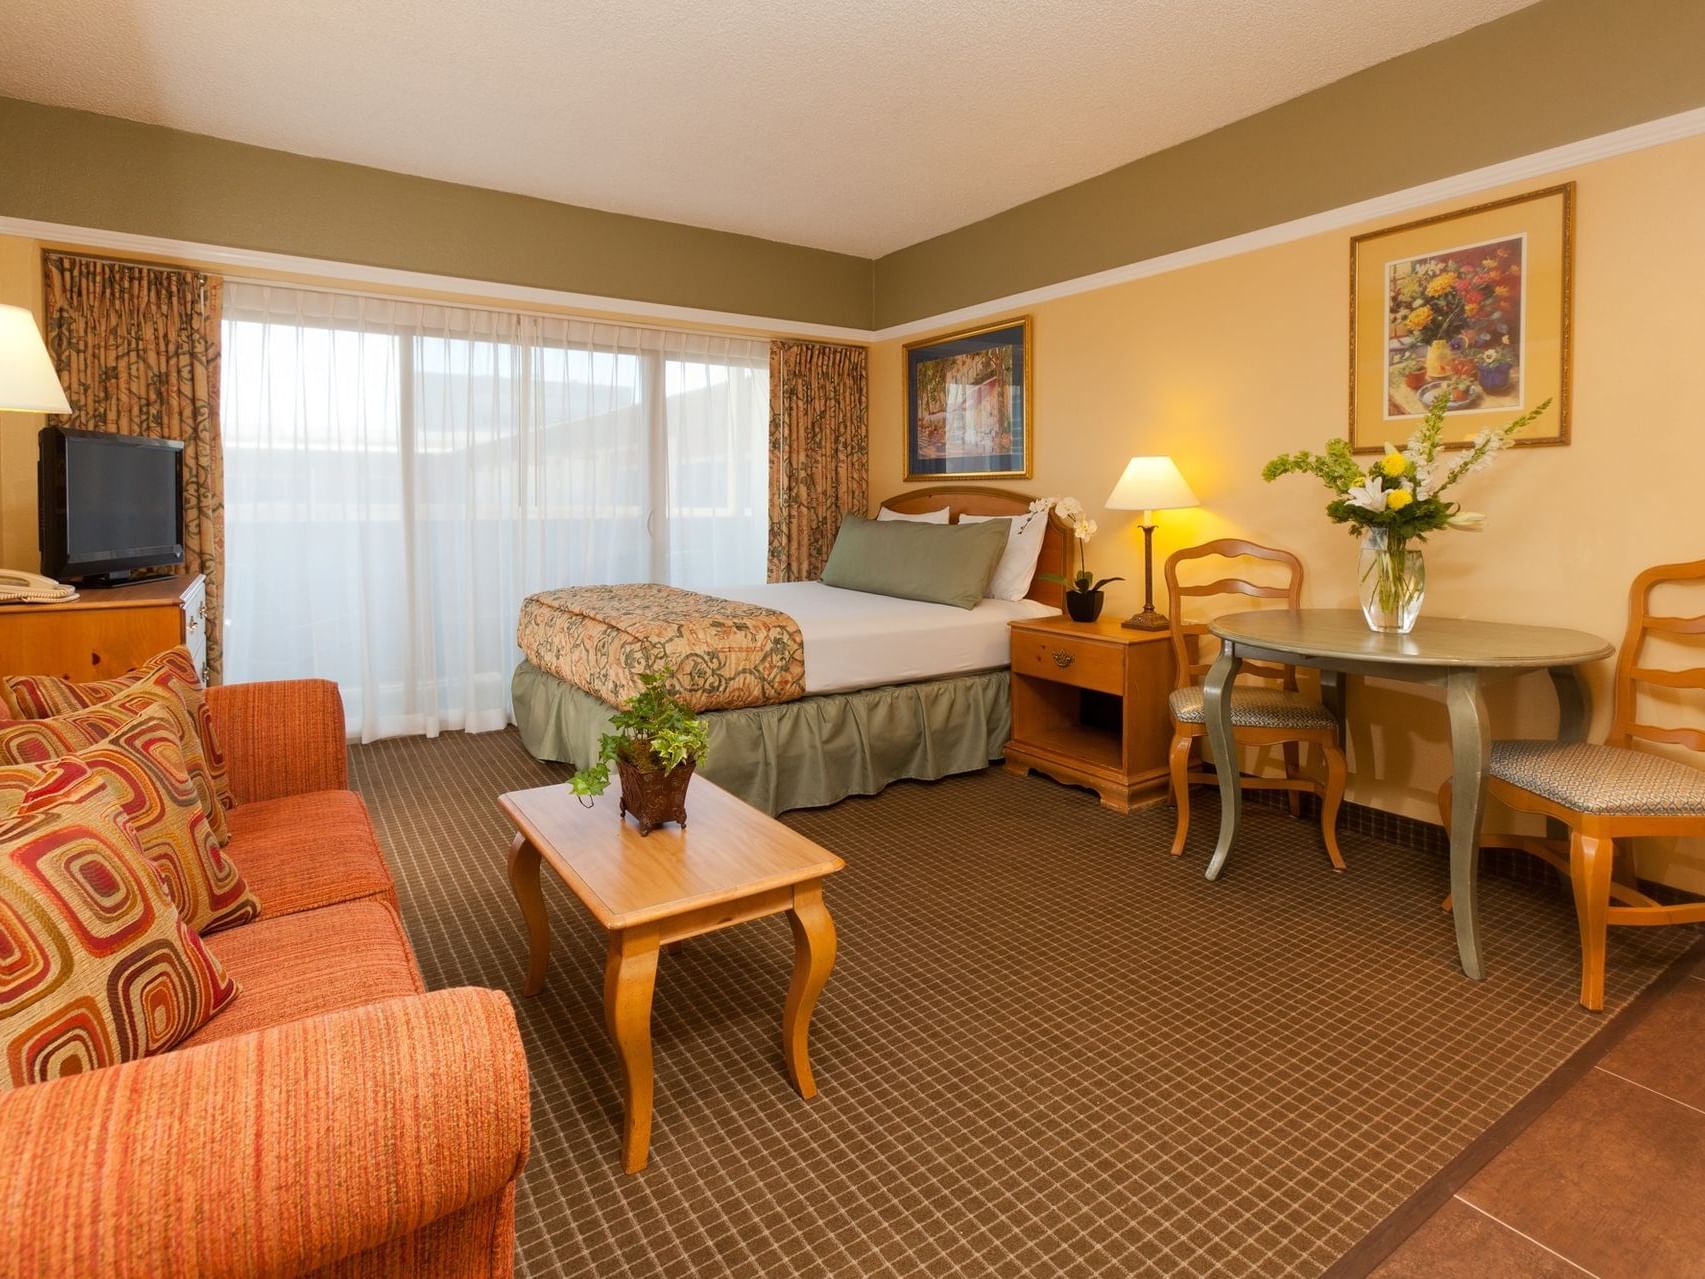 Bed & sofa, Studio accessible suite at Legacy Vacation Resorts